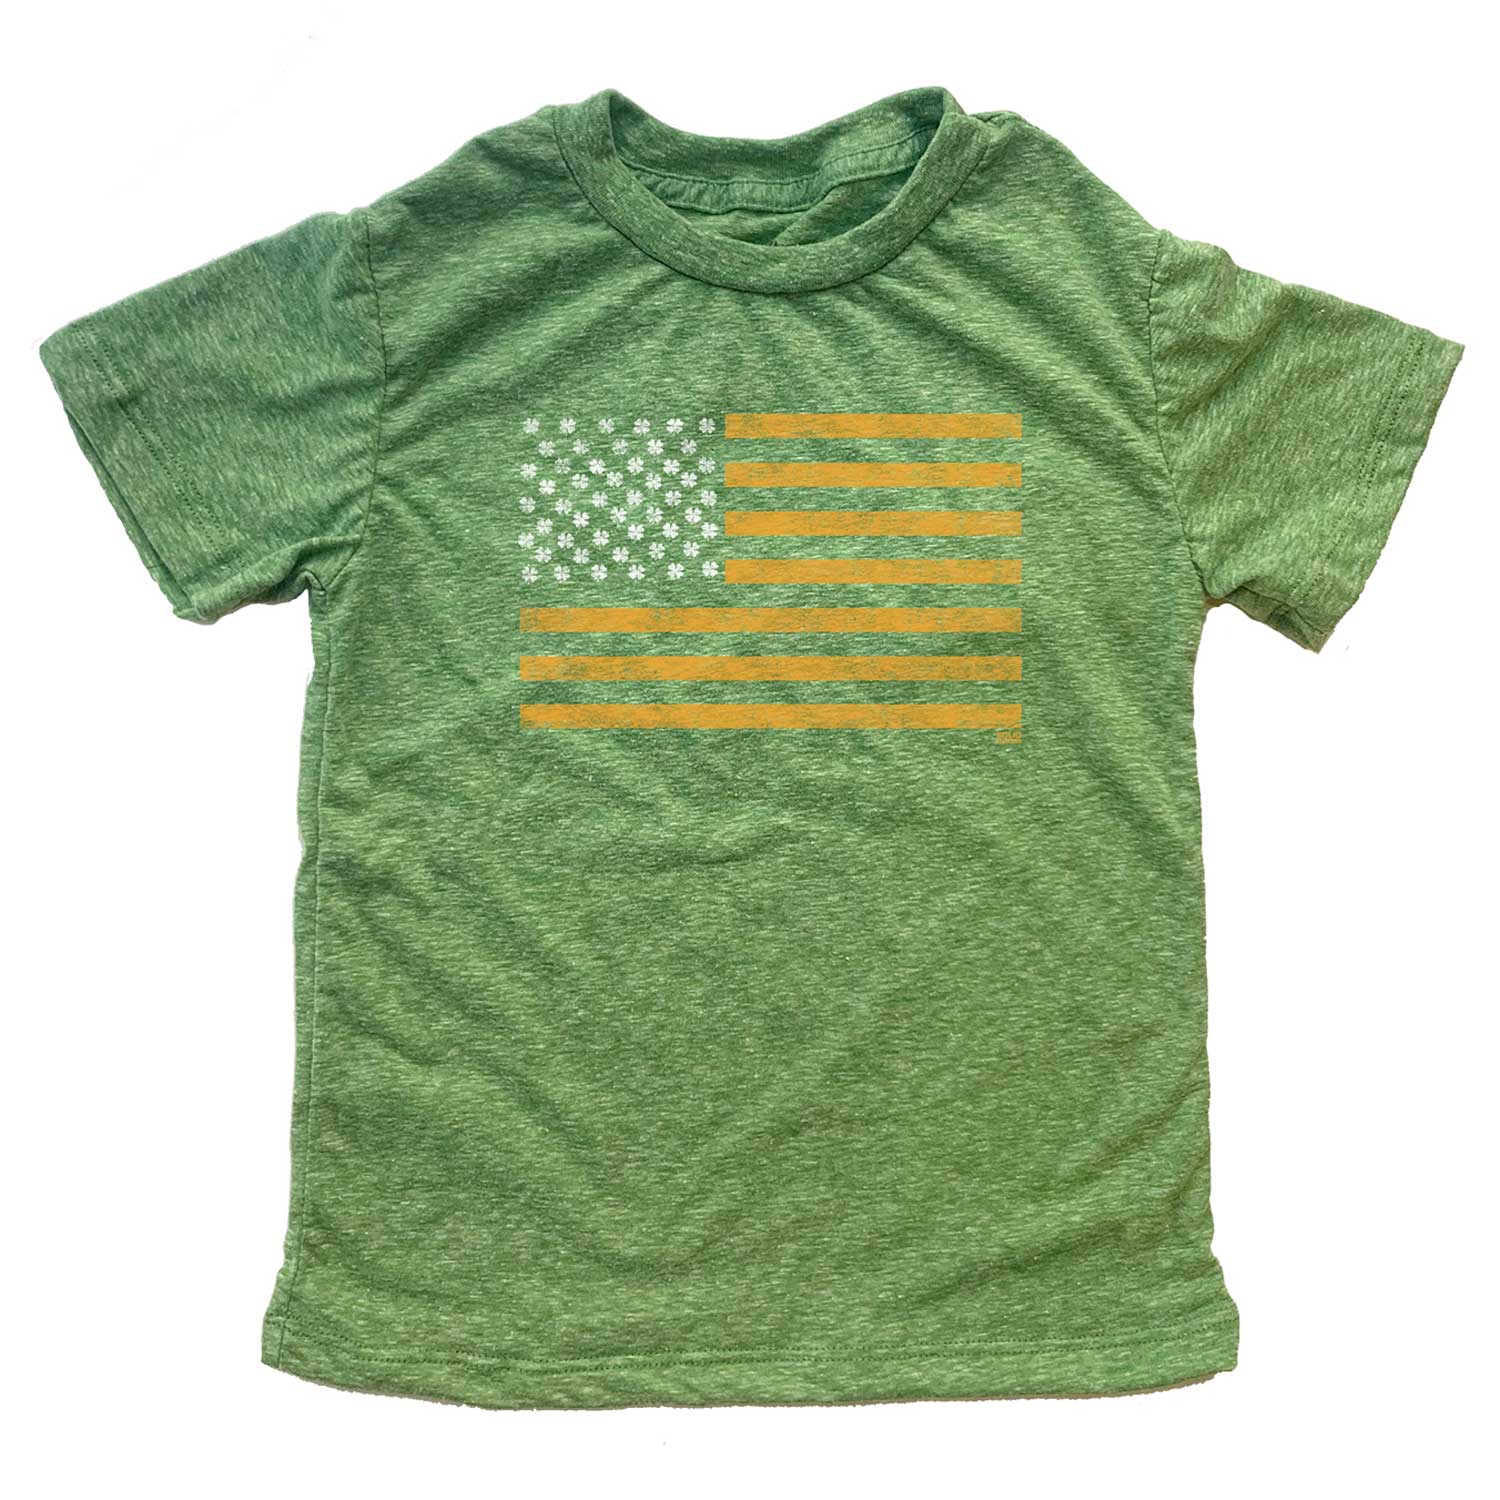 Kid's Irish American Retro St. Paddy's Graphic Tee | Cool Shamrock T-shirt for Youth | Solid Threads